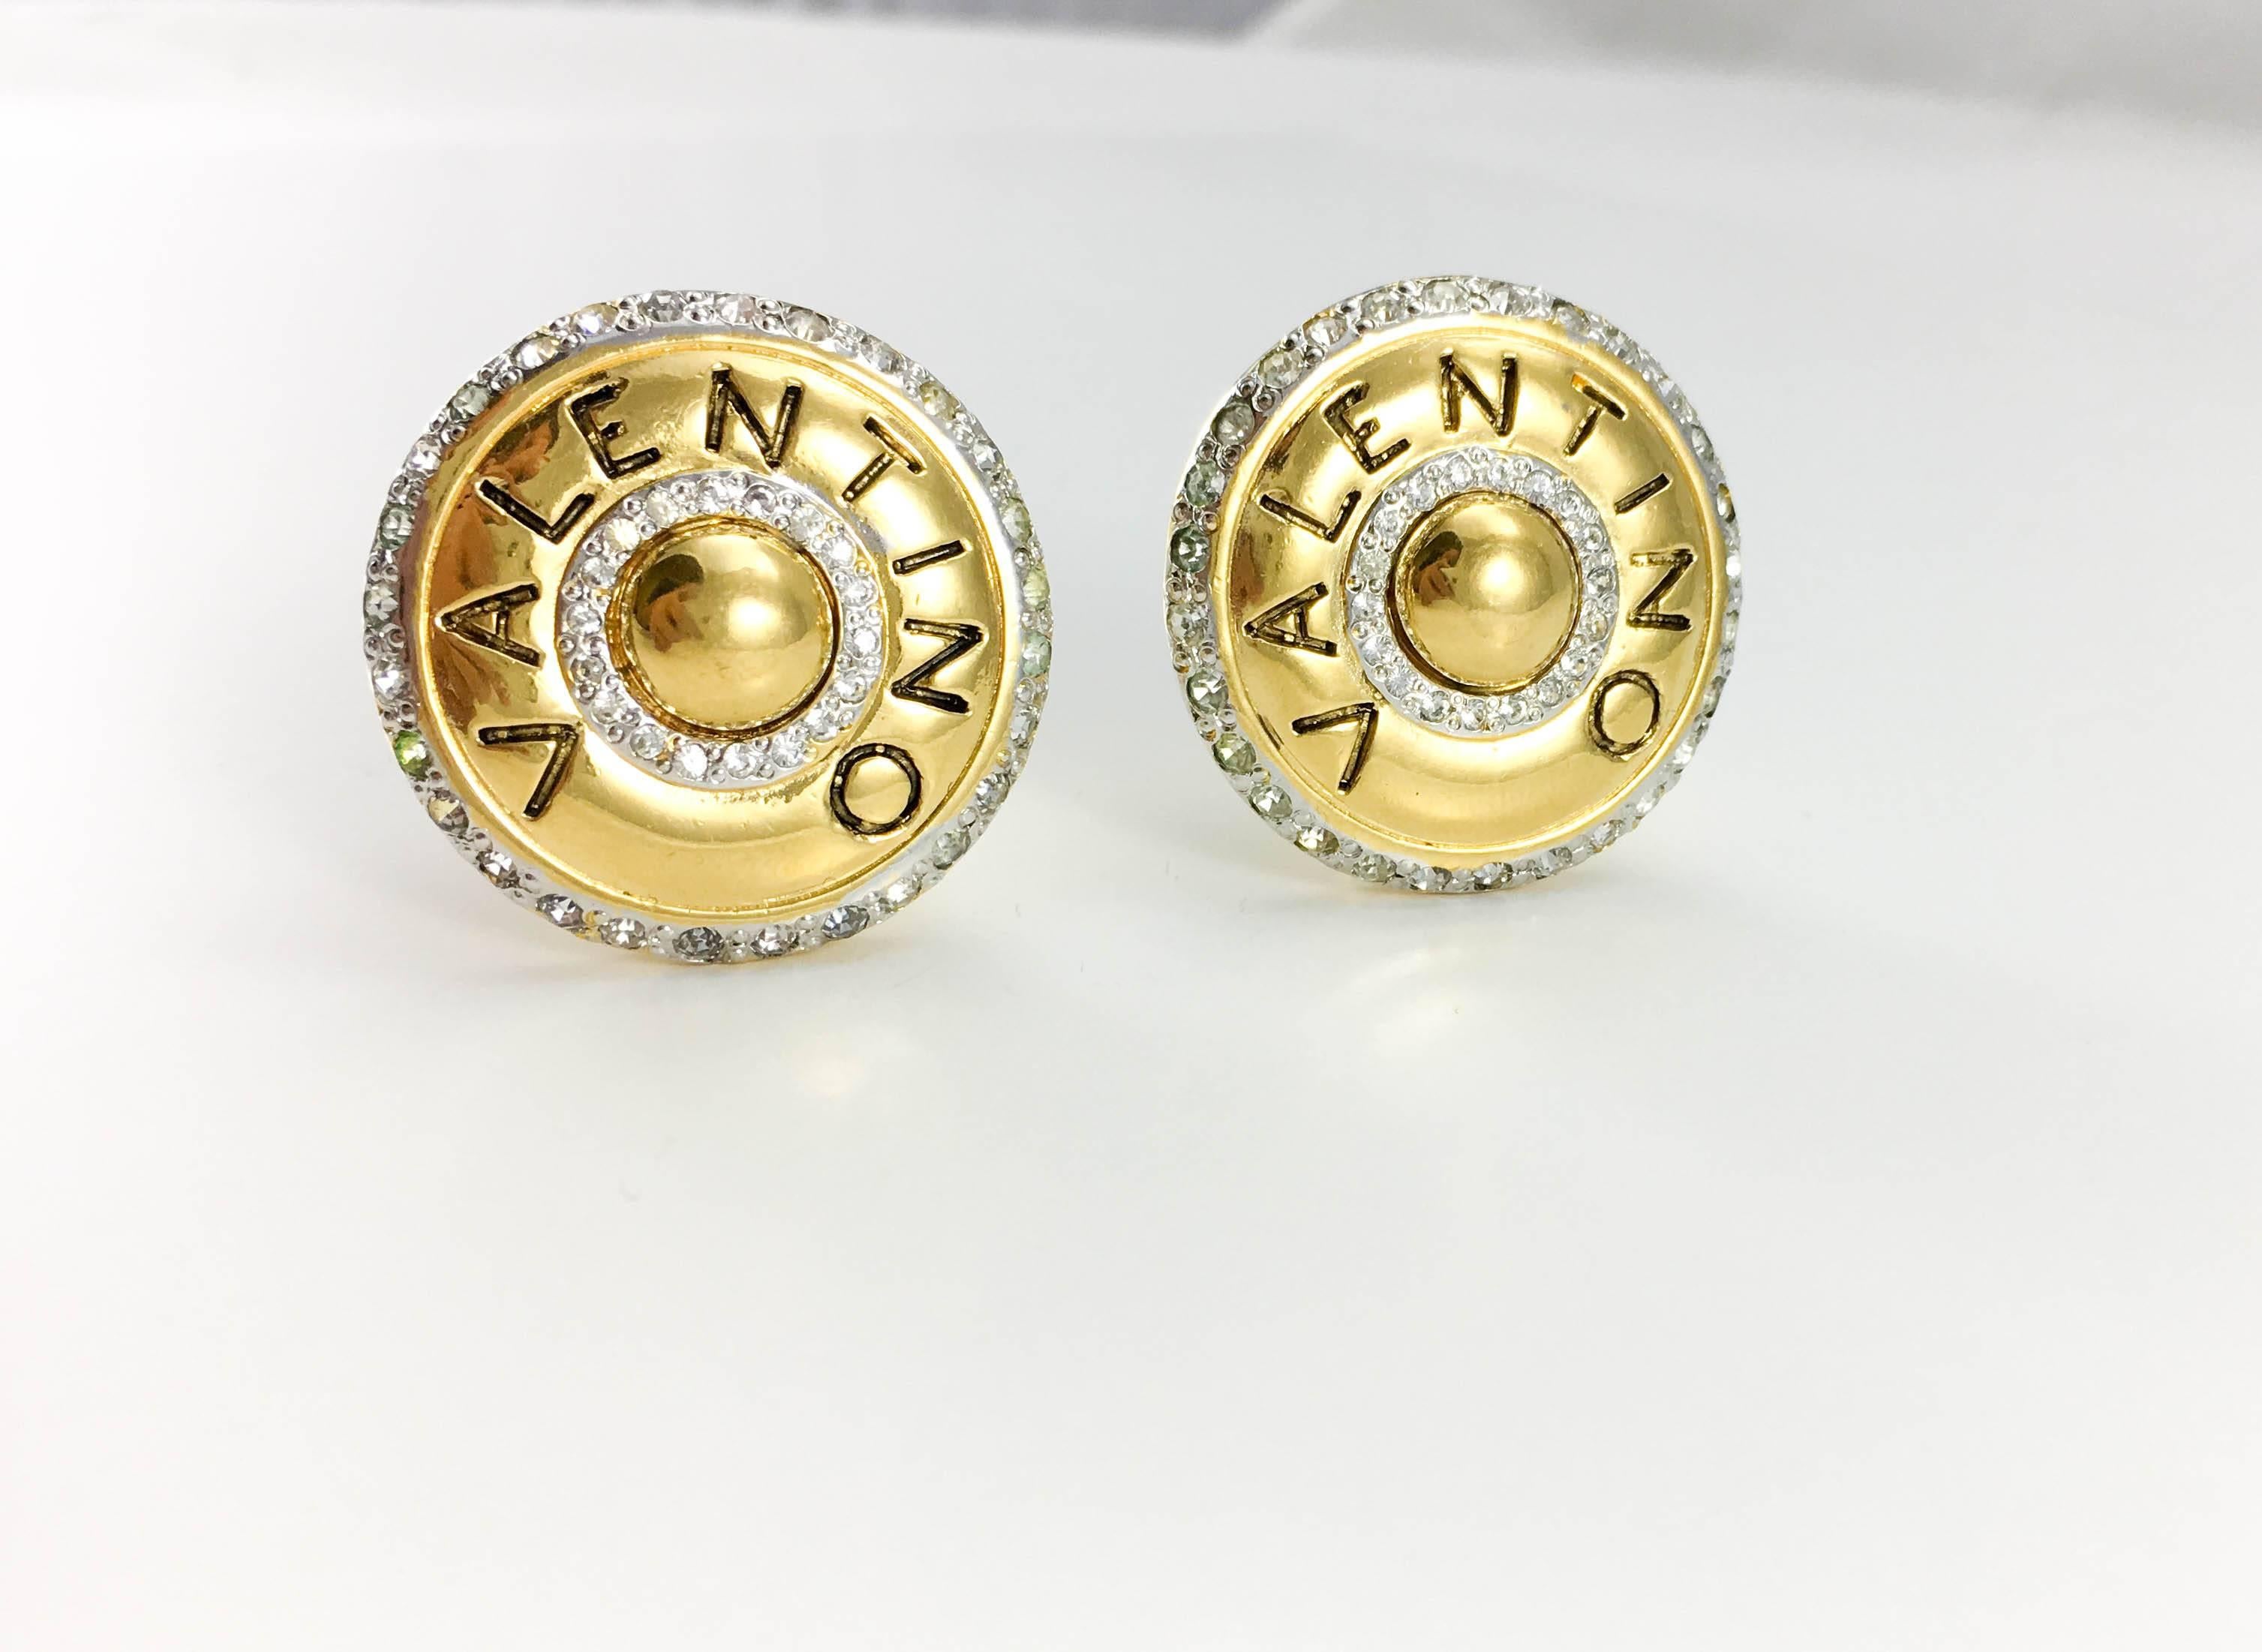 Vintage Valentino Gilt Metal and Rhinestone Round Clip-On Earrings. These very stylish Valentino earrings date back from the 1980’s. Round, they are made in gilt metal, are embellished with rhinestones along the edge, as well as forming an inner